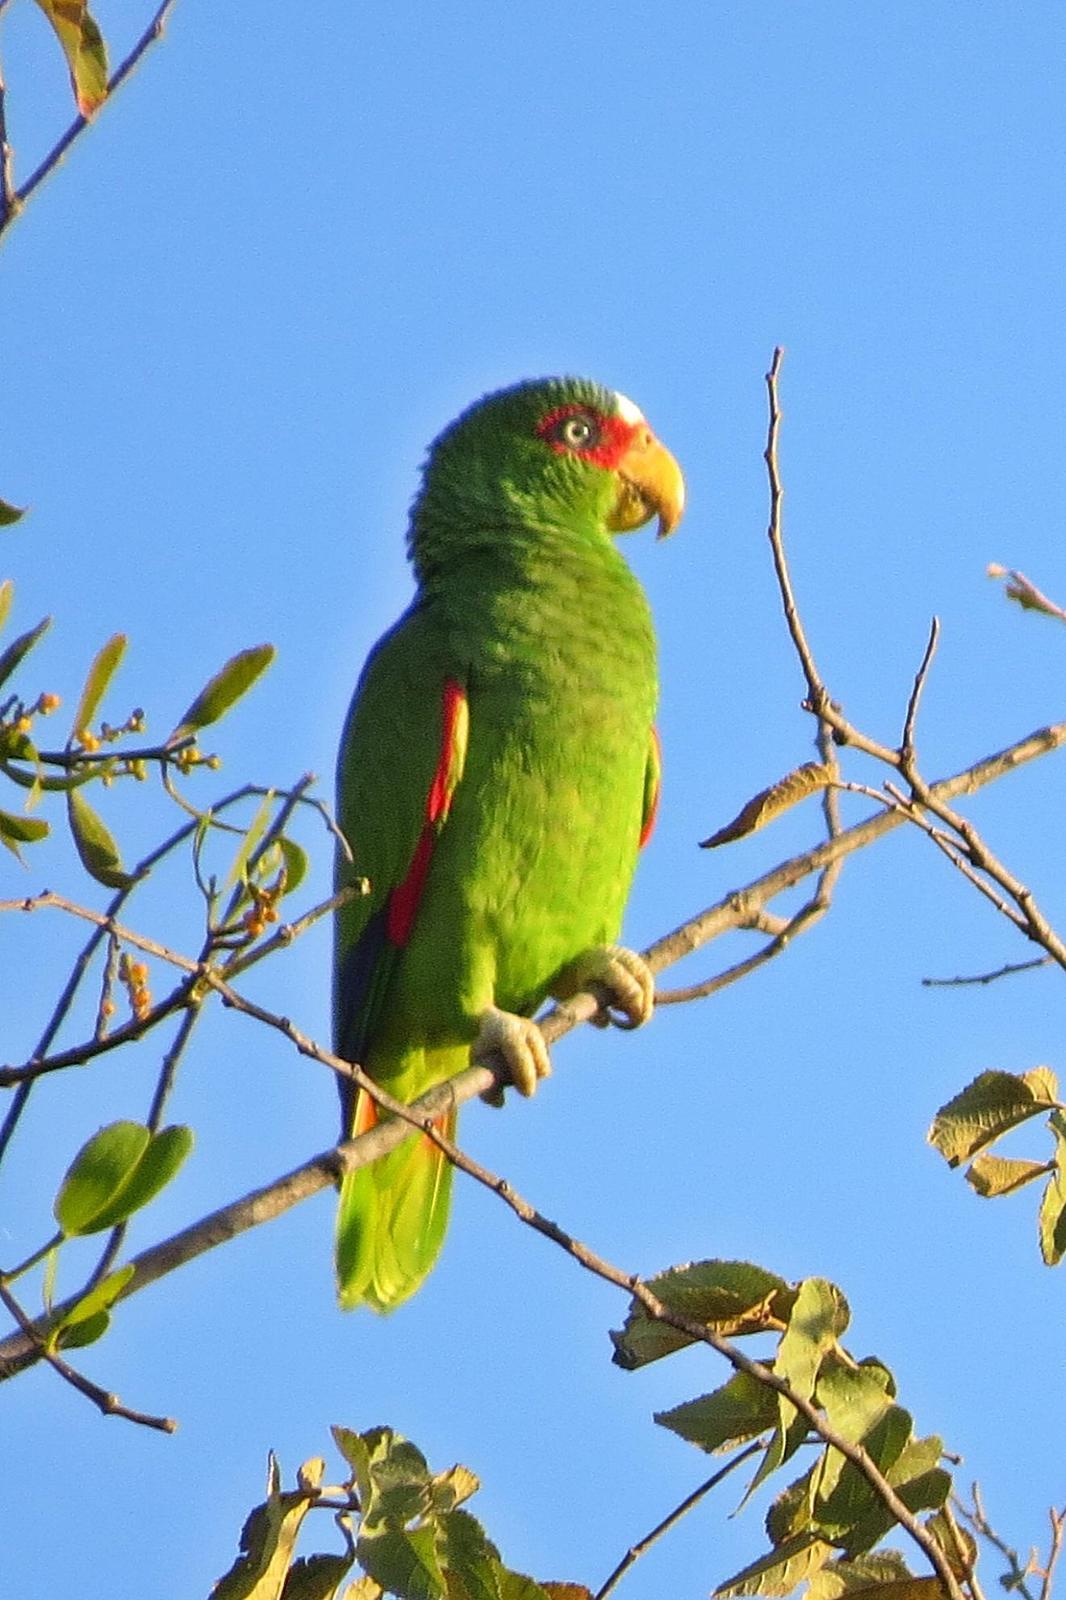 White-fronted Parrot Photo by Enid Bachman